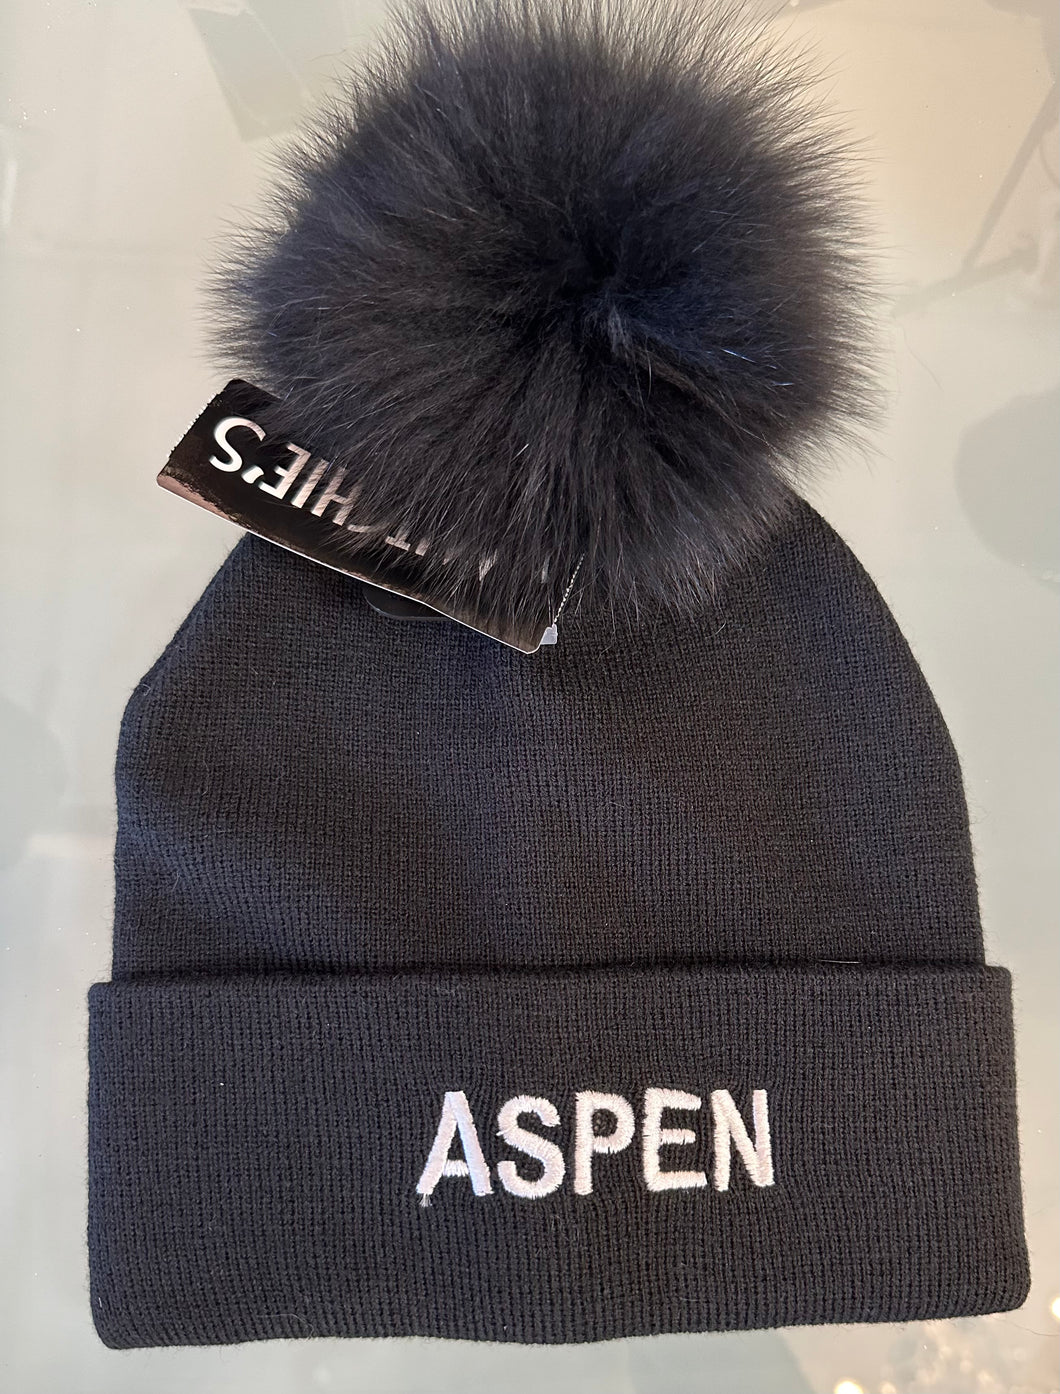 Mitchie’s Aspen Embroidered Hat with Fur Pom